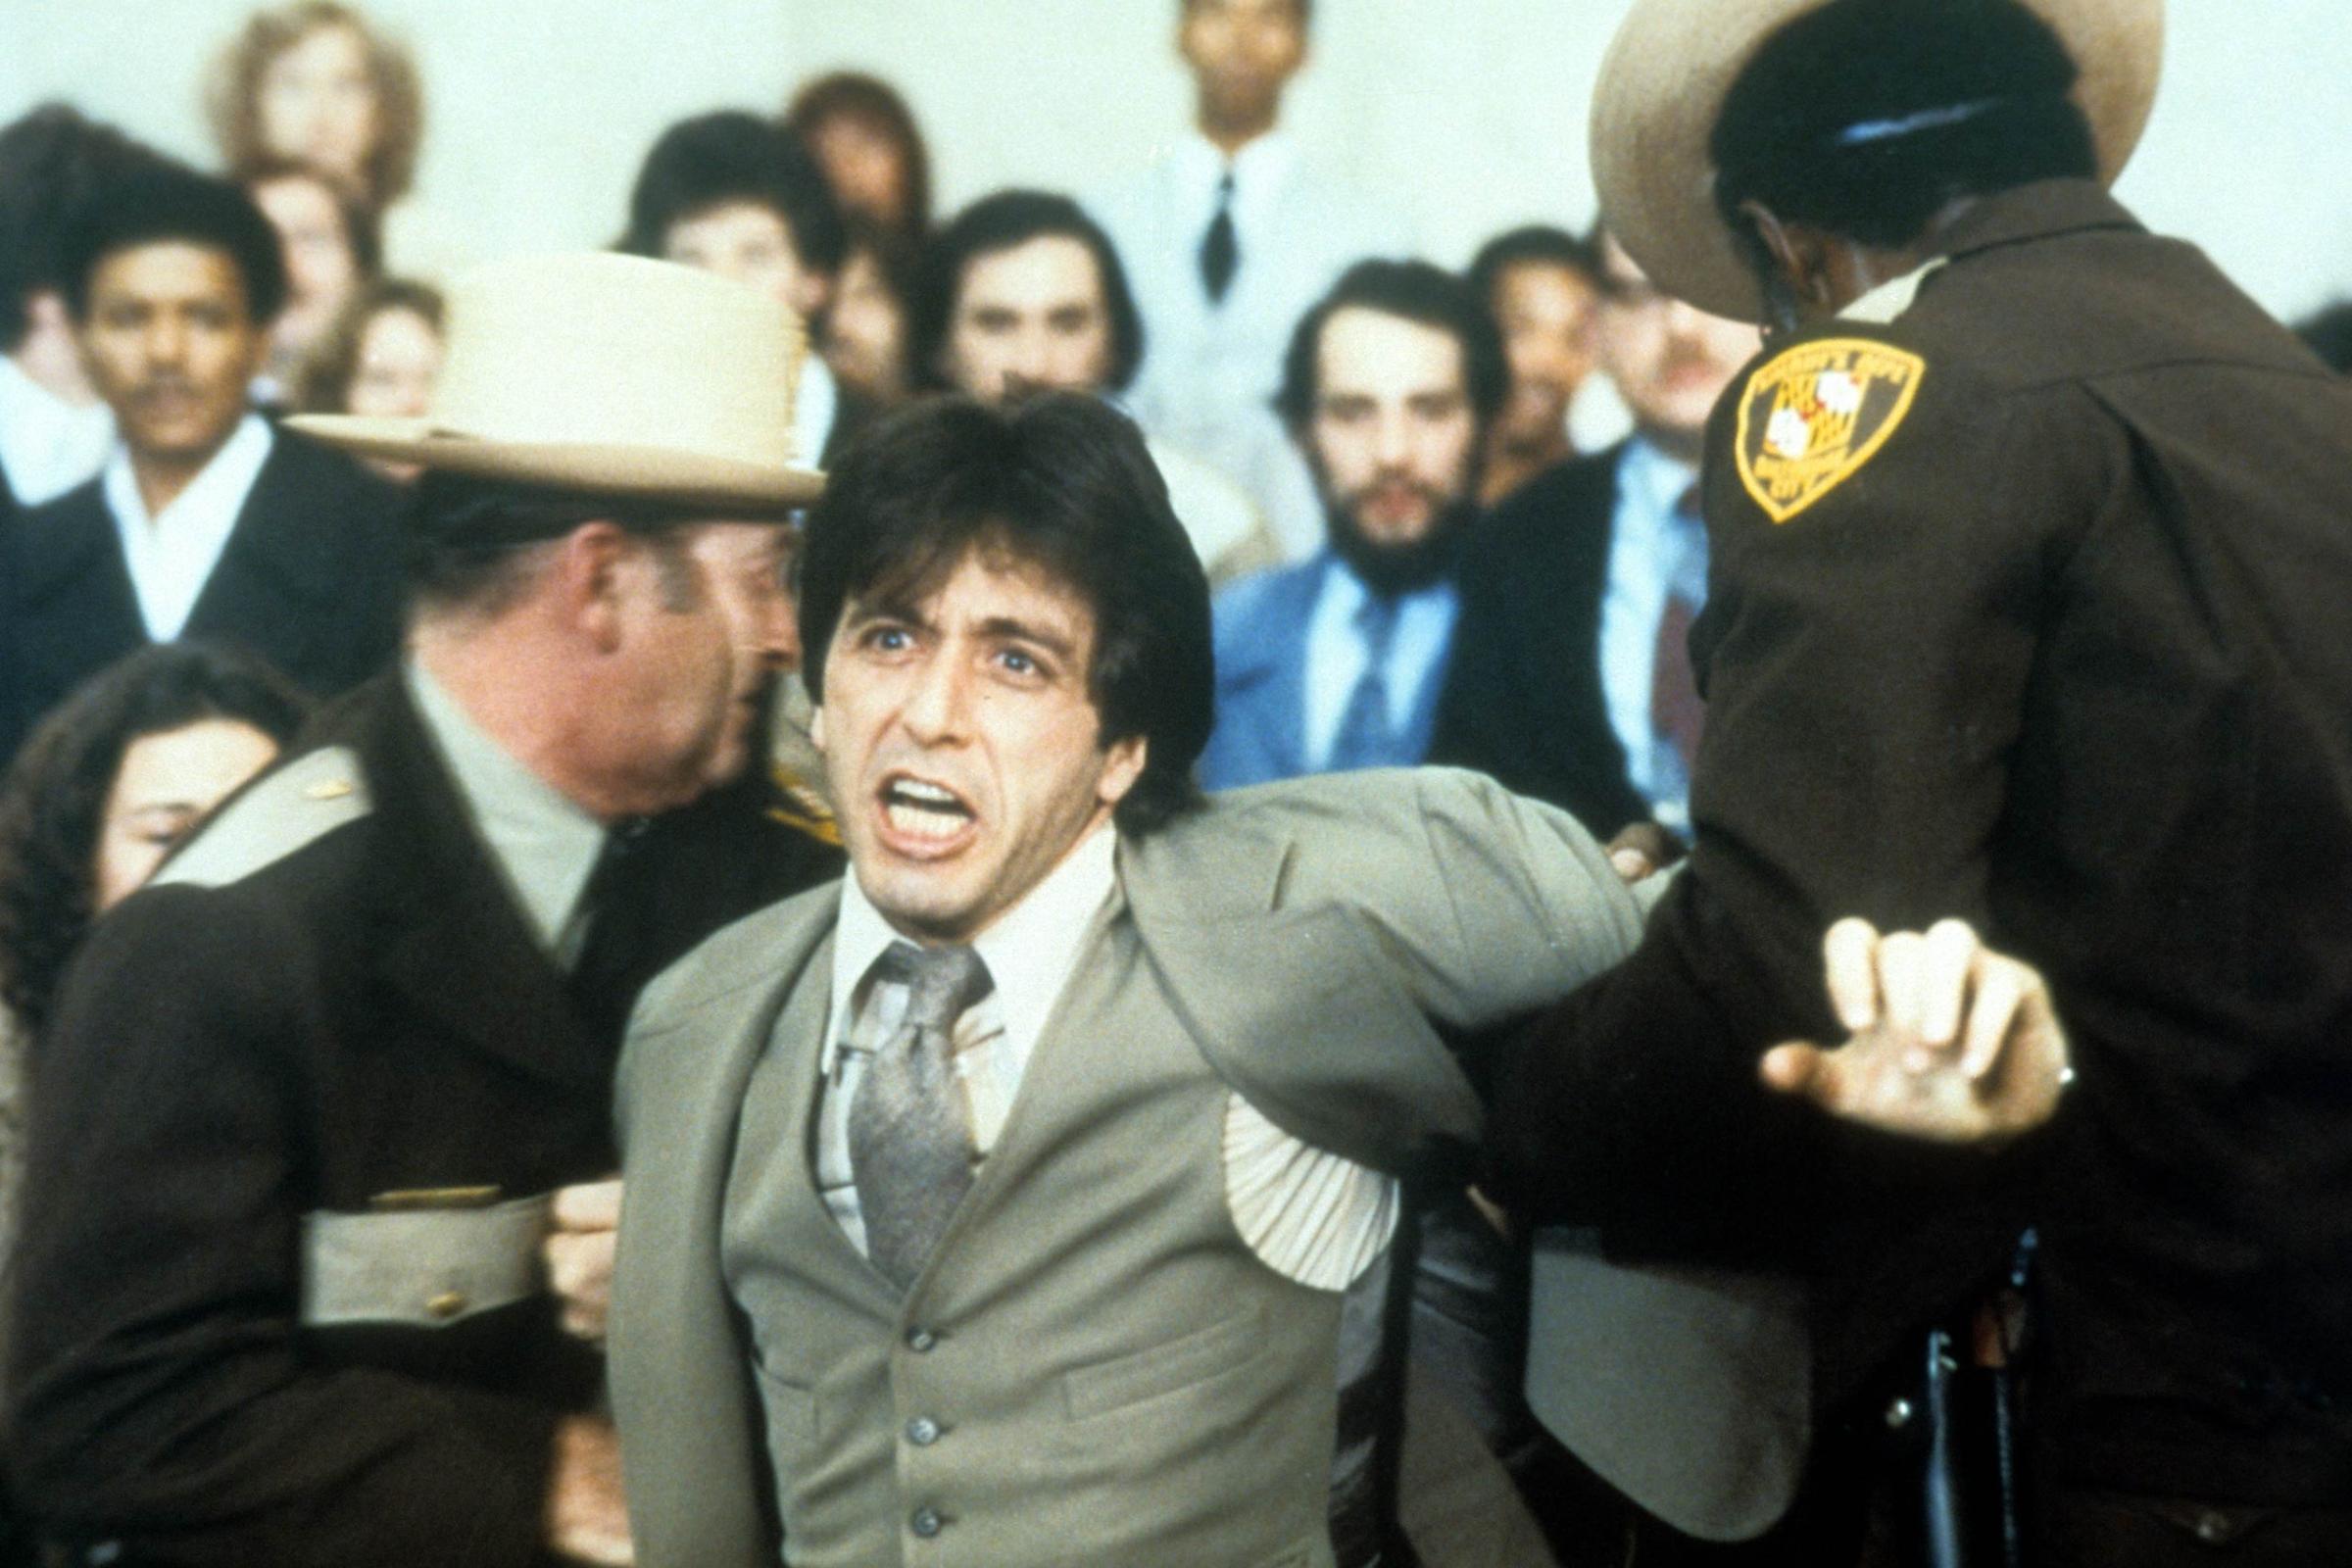 Al Pacino In '...And Justice For All.'